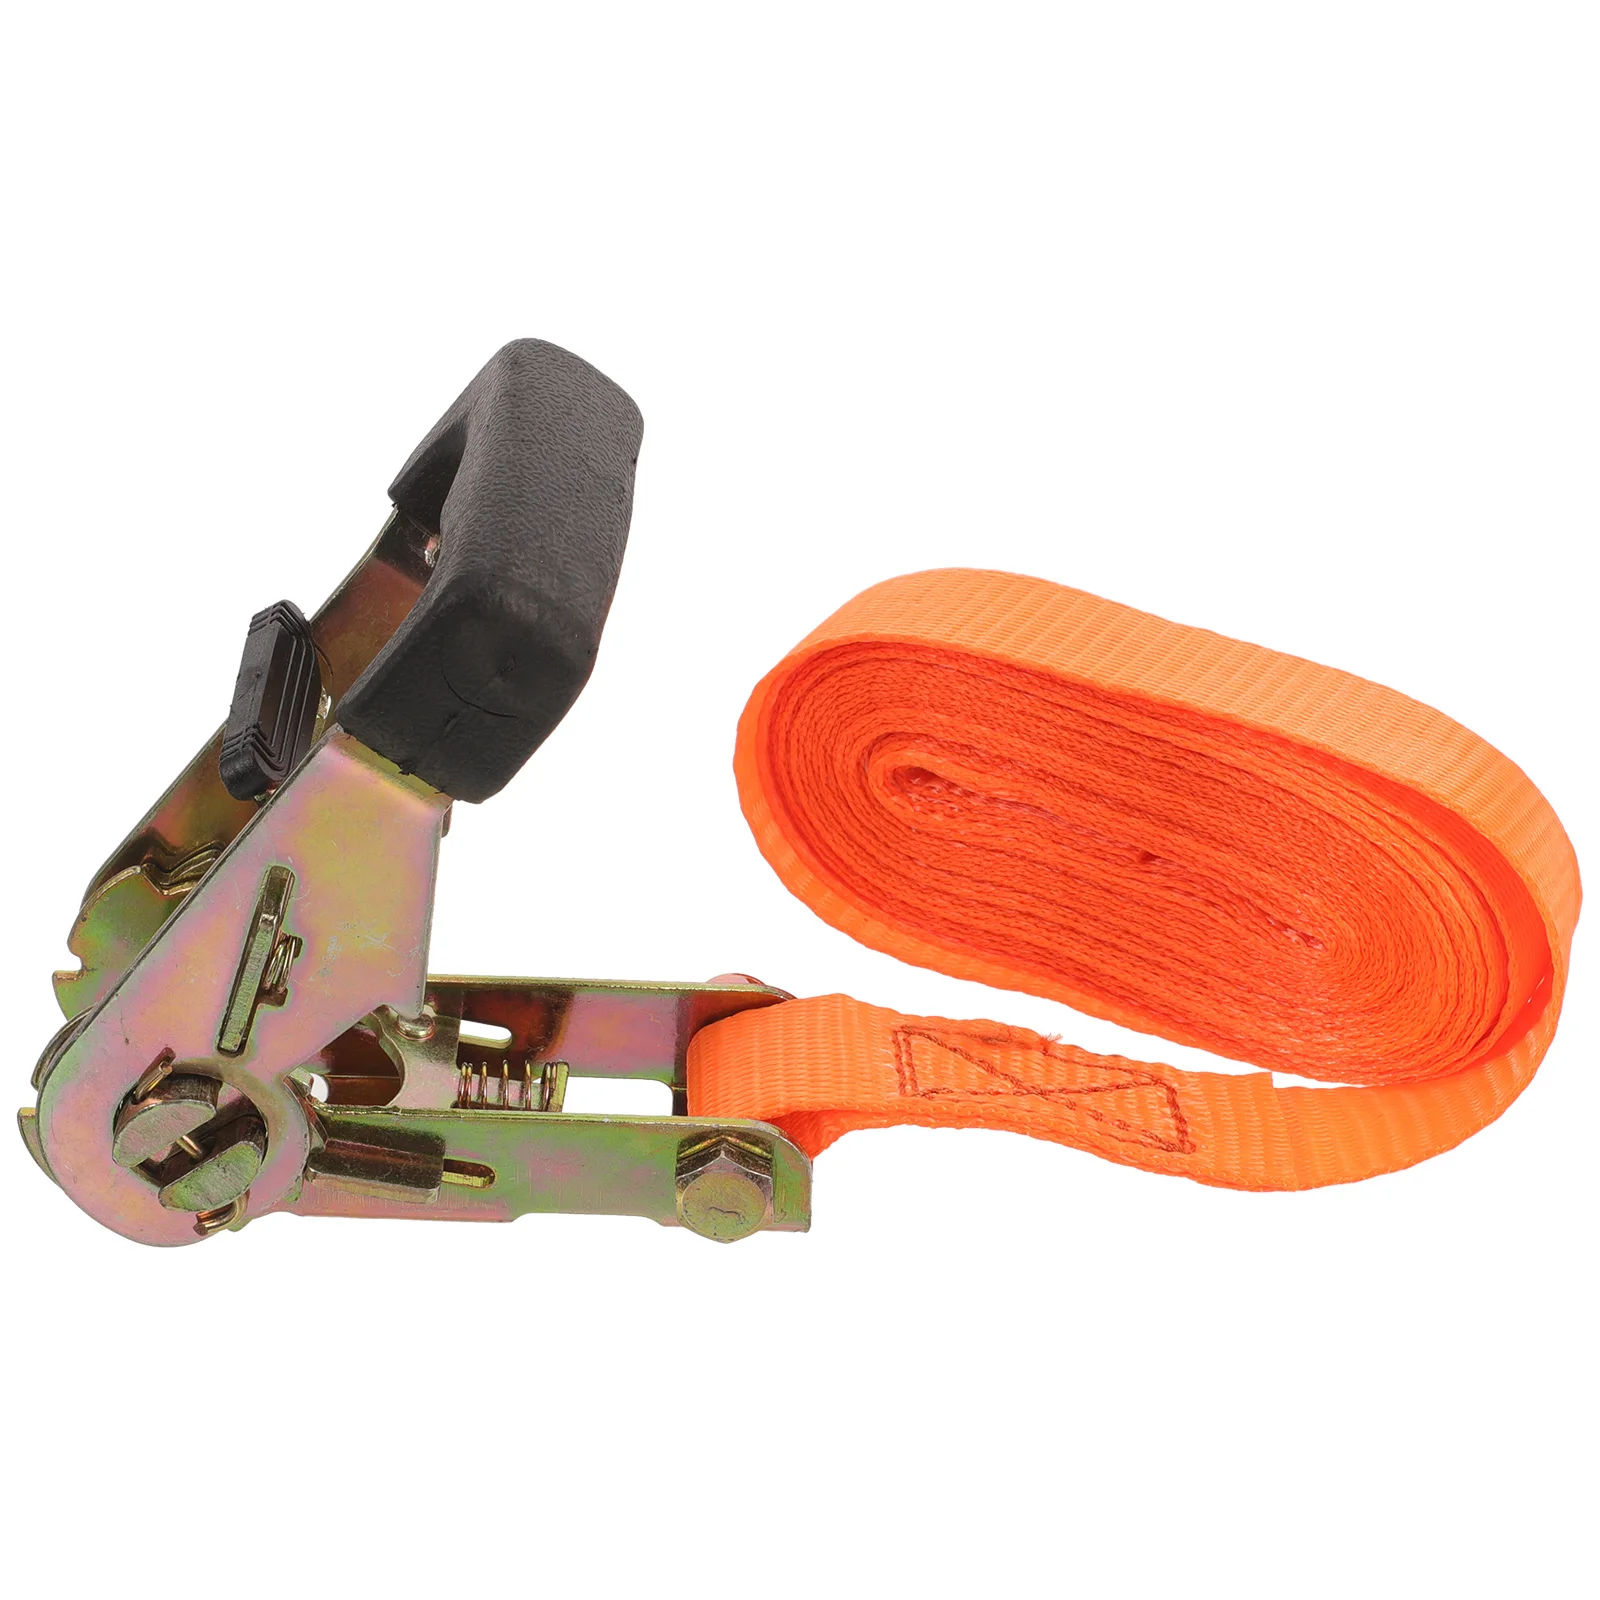 

Cargo Strap Tie down Straps for Trucks Lashing Luggage Packing Belt Trailers Ratchet Heavy Duty Ratchets